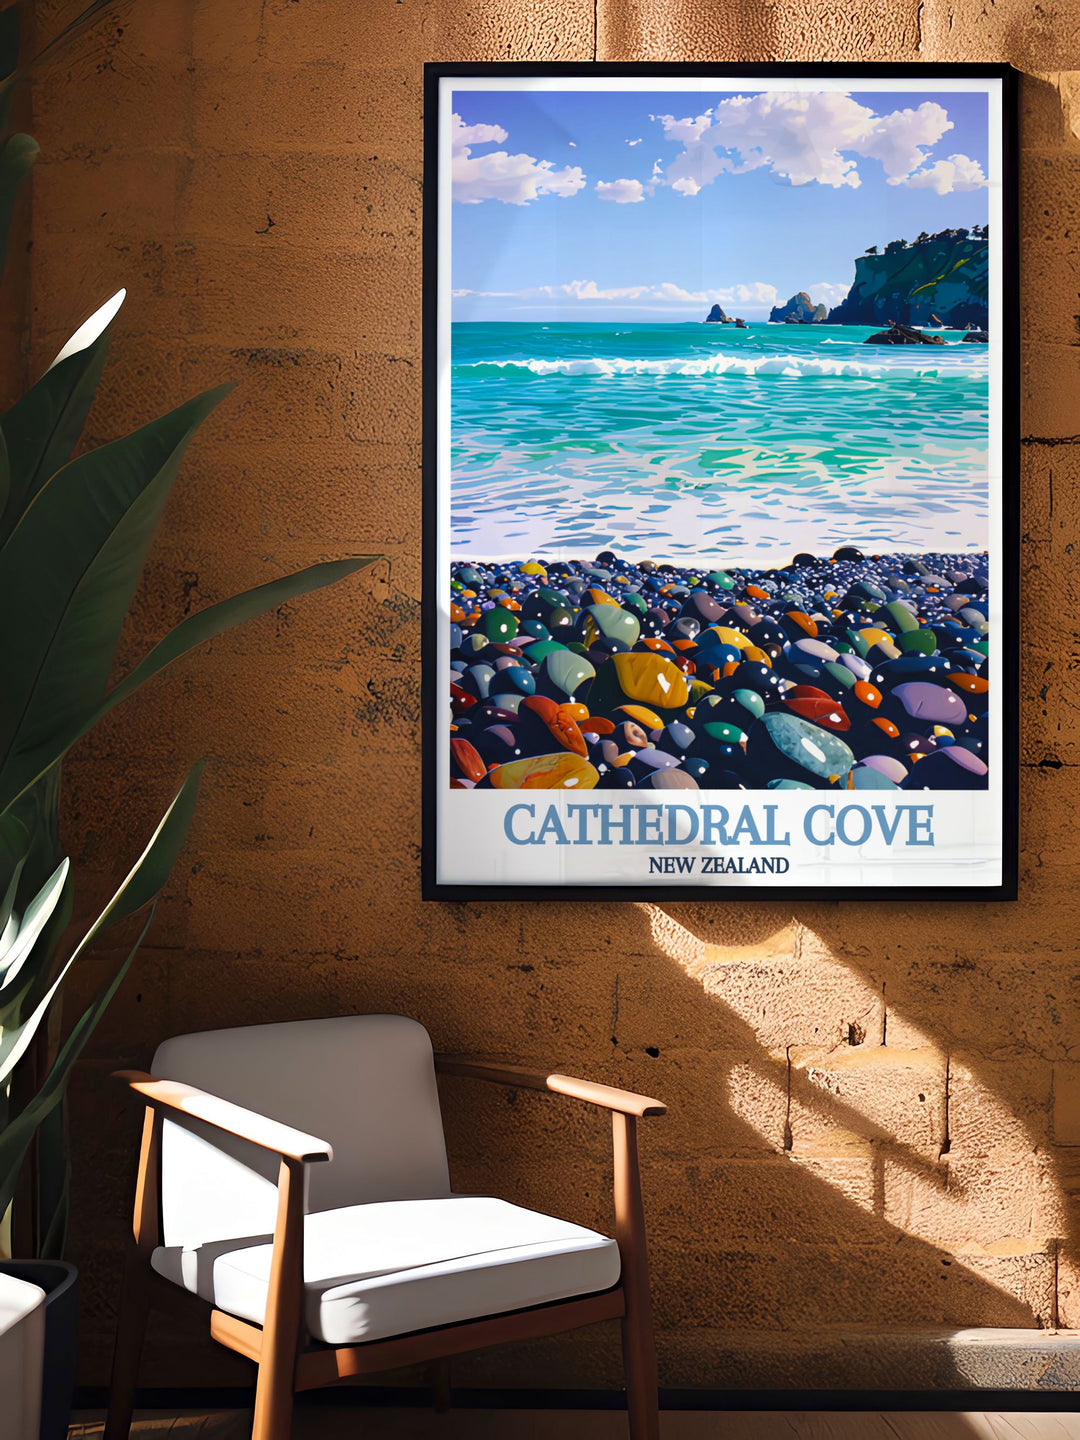 Cathedral Coves majestic archway stands tall against the backdrop of a serene beach and crystal clear waters.